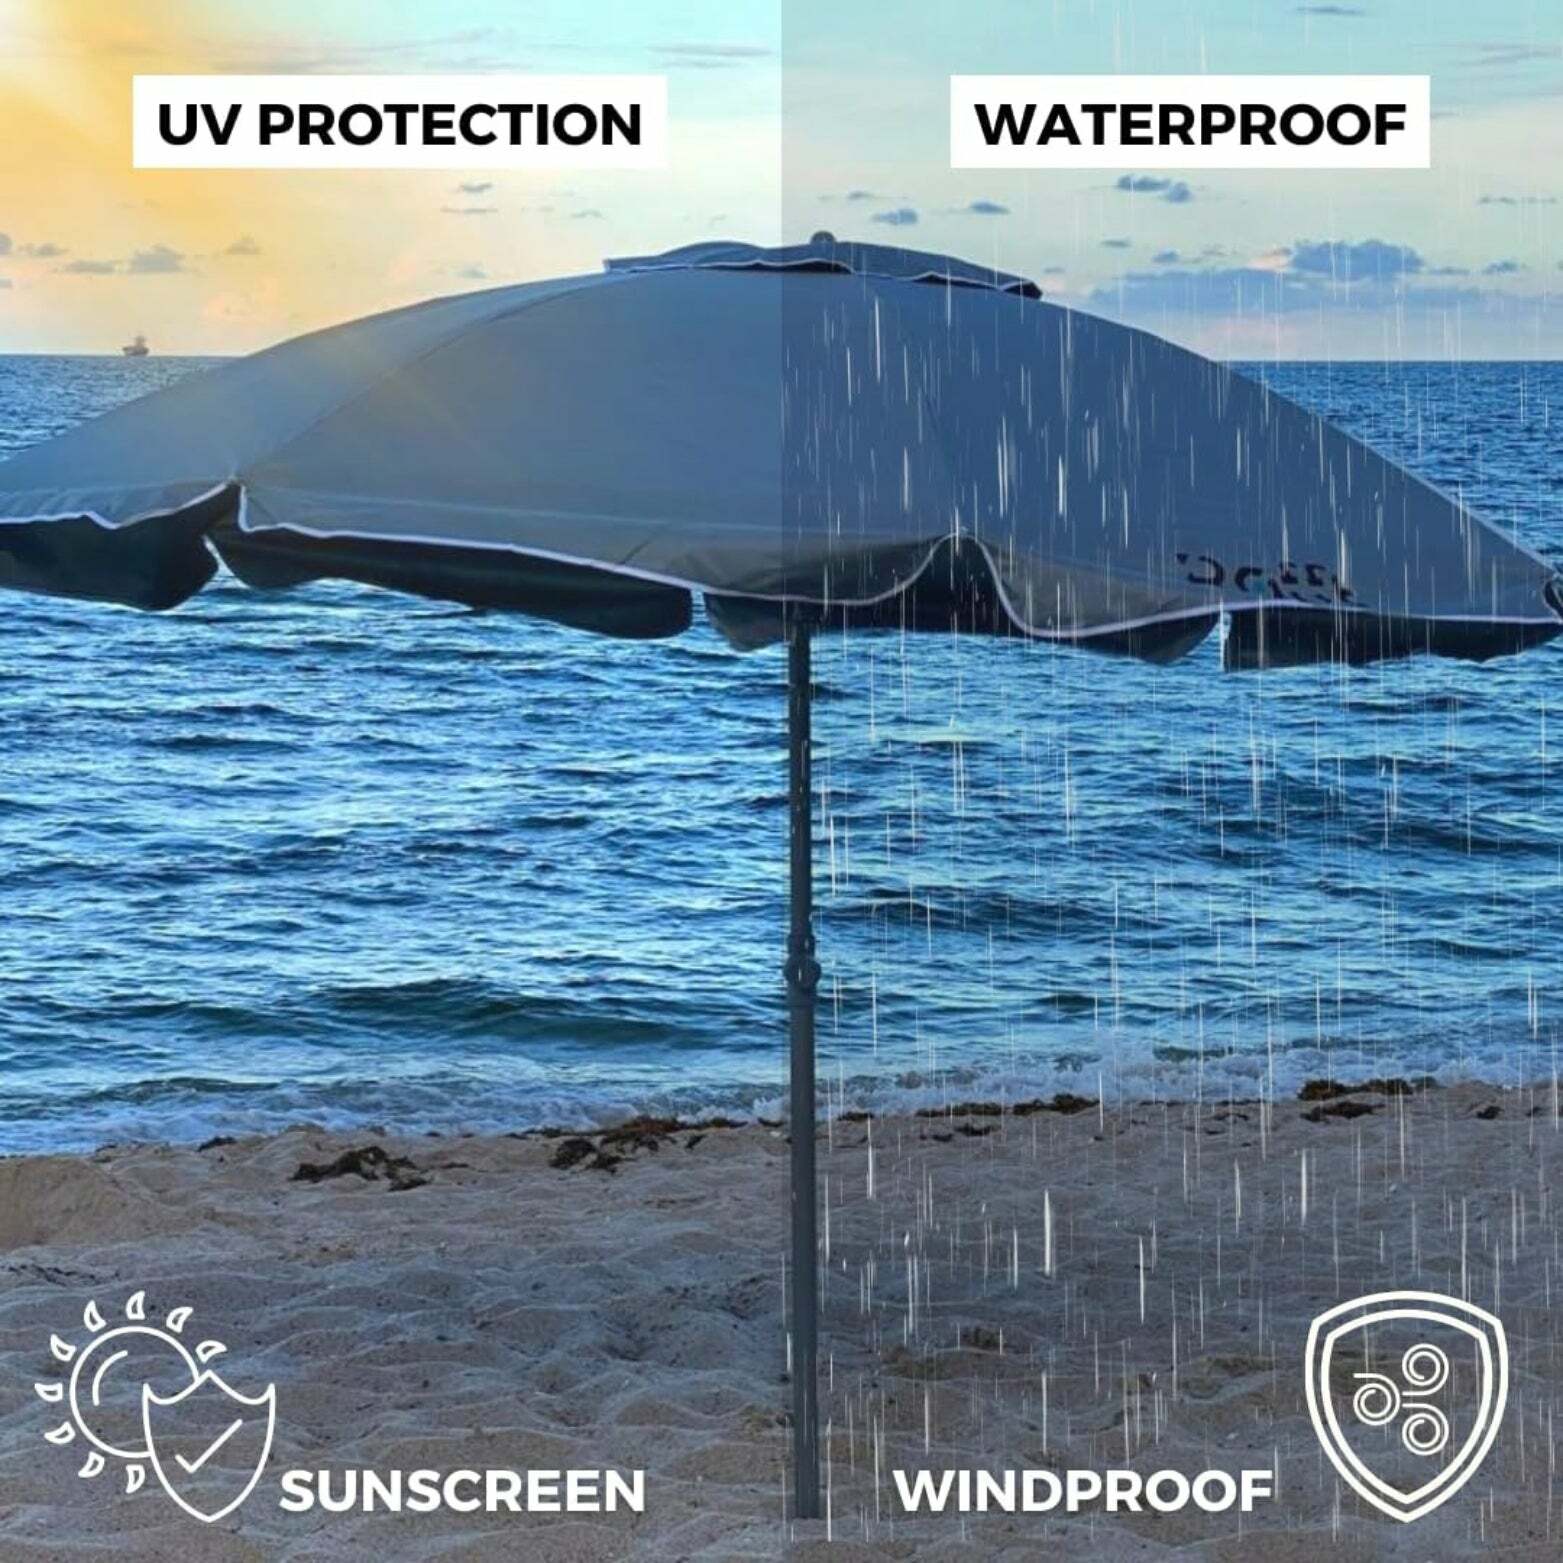 ROFFT Sturdy Beach Umbrella with UV Protection and Windproof Design - 6.5 Ft Coverage, Steel & Aluminum Pole, Tilt Adjustment- Gray